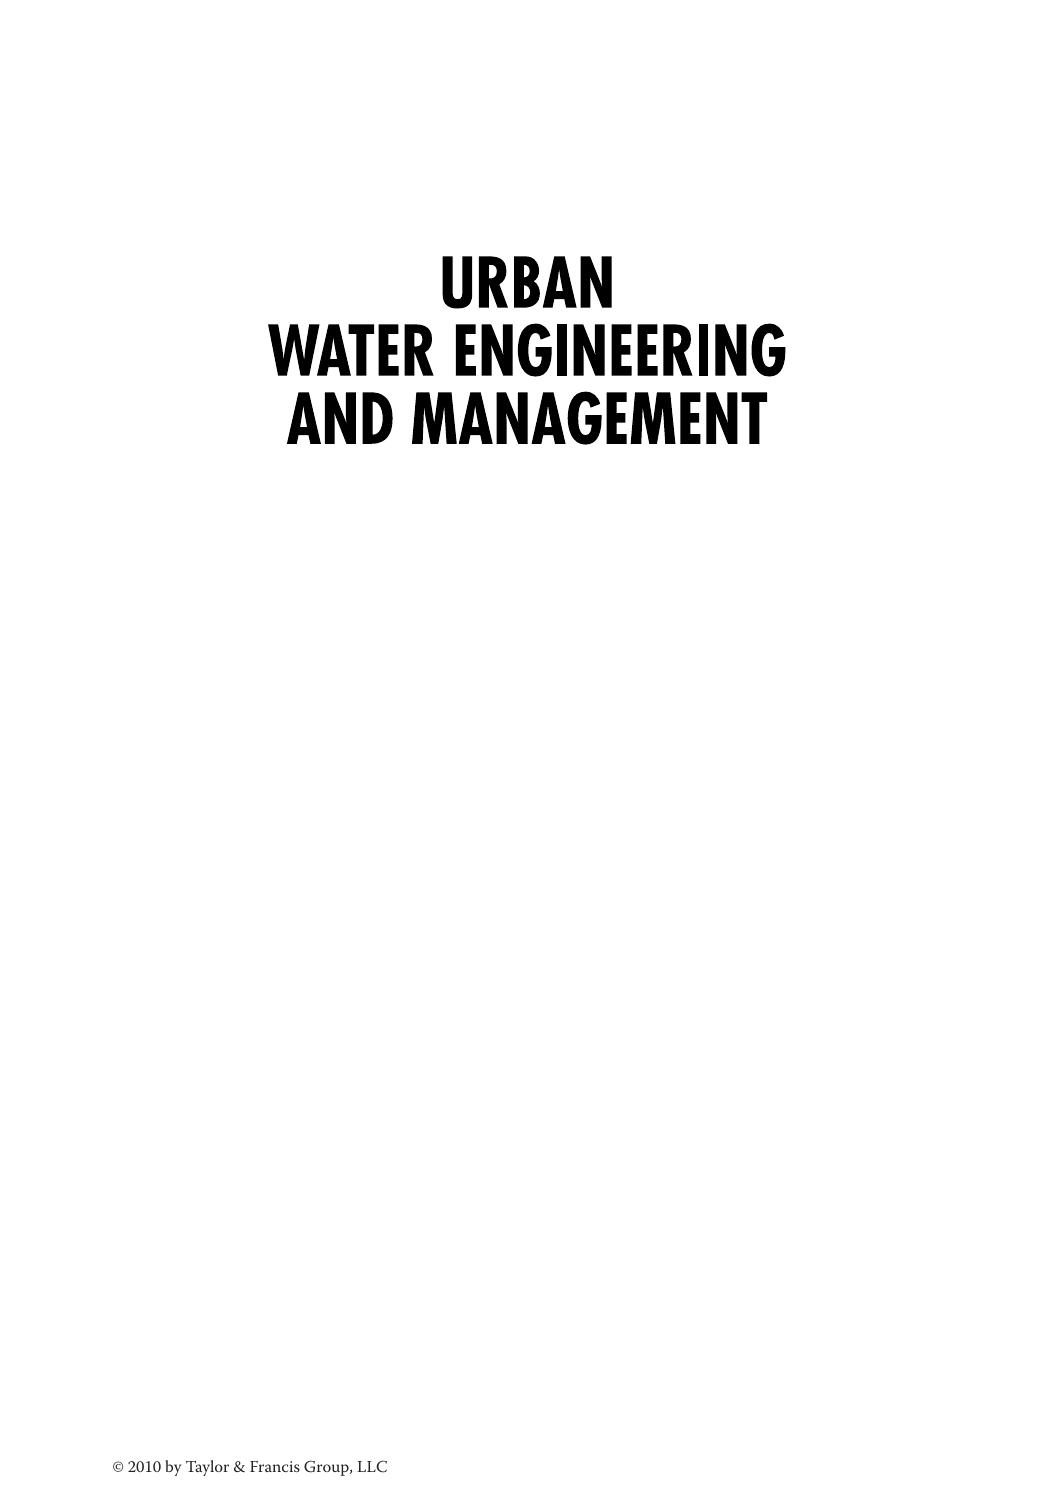 Urban Water Engineering and Management 2010